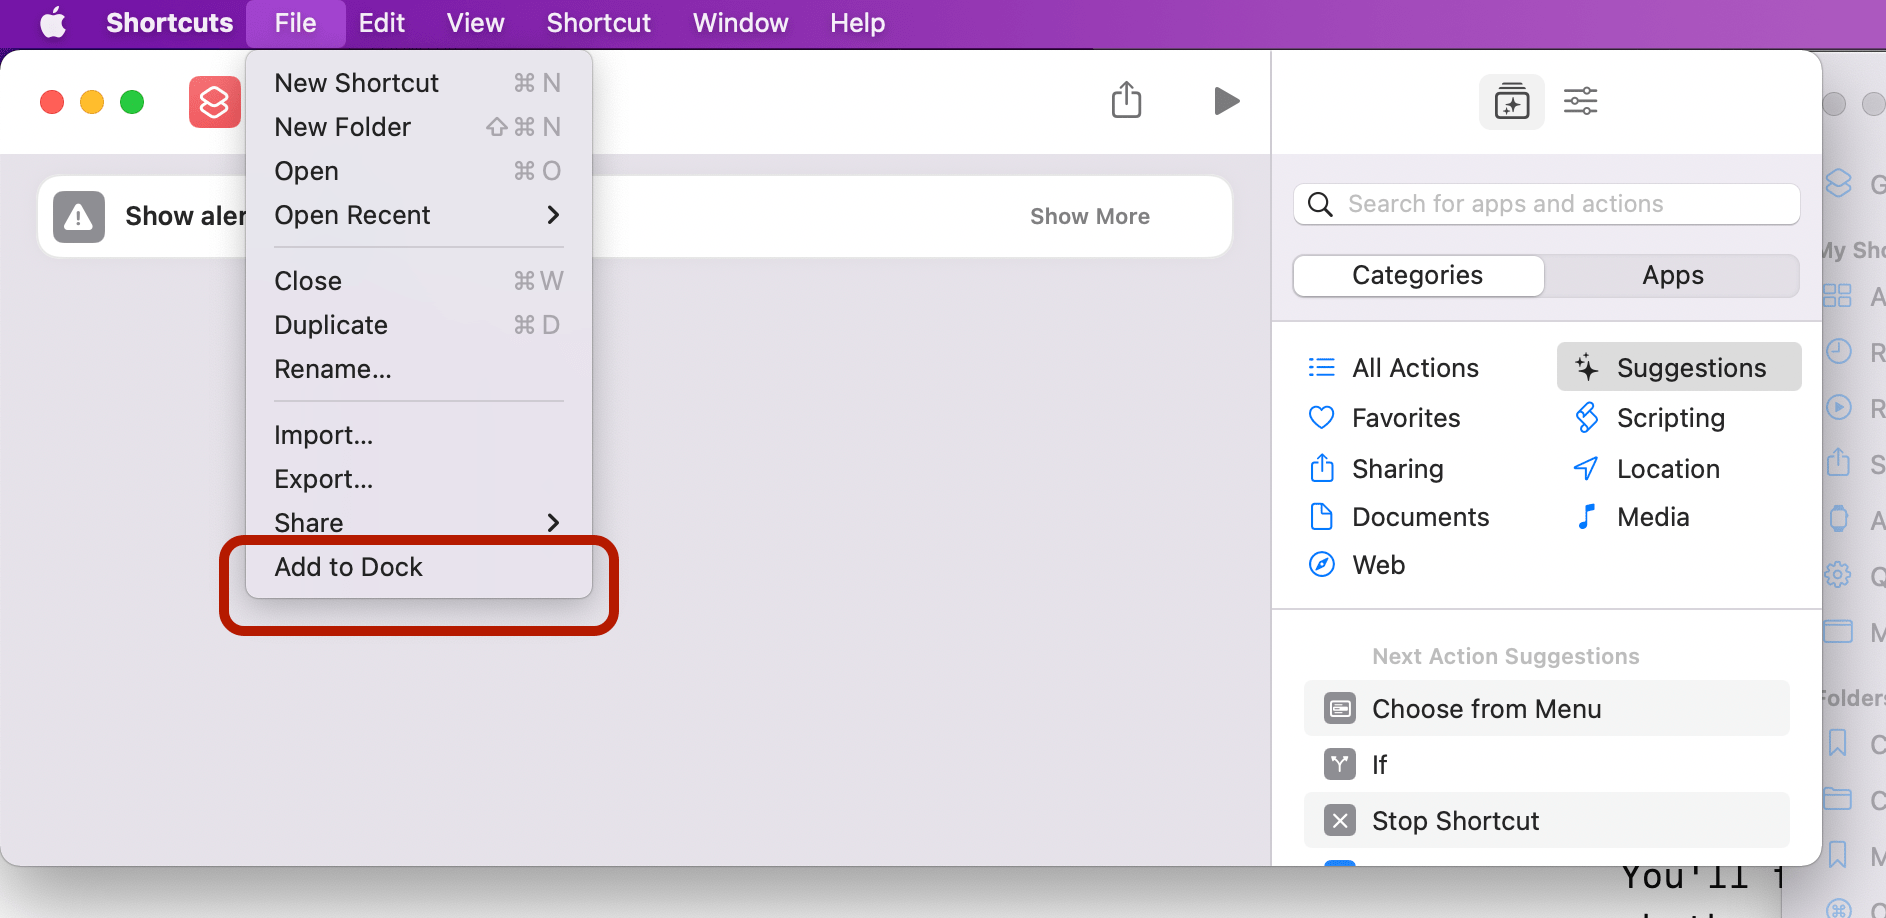 Who knows why, but the only way to add a shortcut to the Dock is from the File menu.